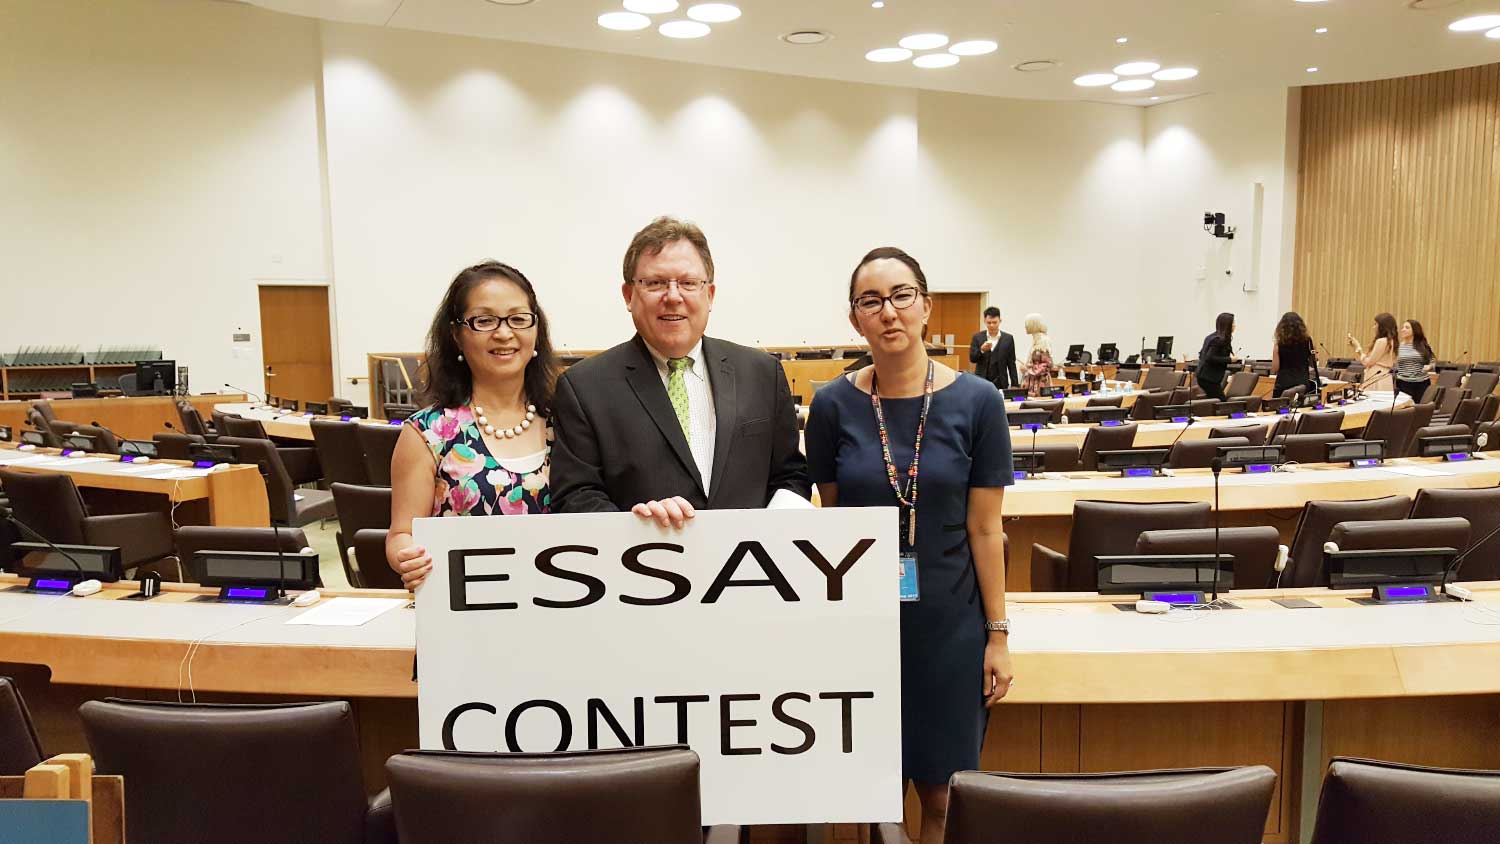 Photo: 3 adults in conference room with Essay Contest sign